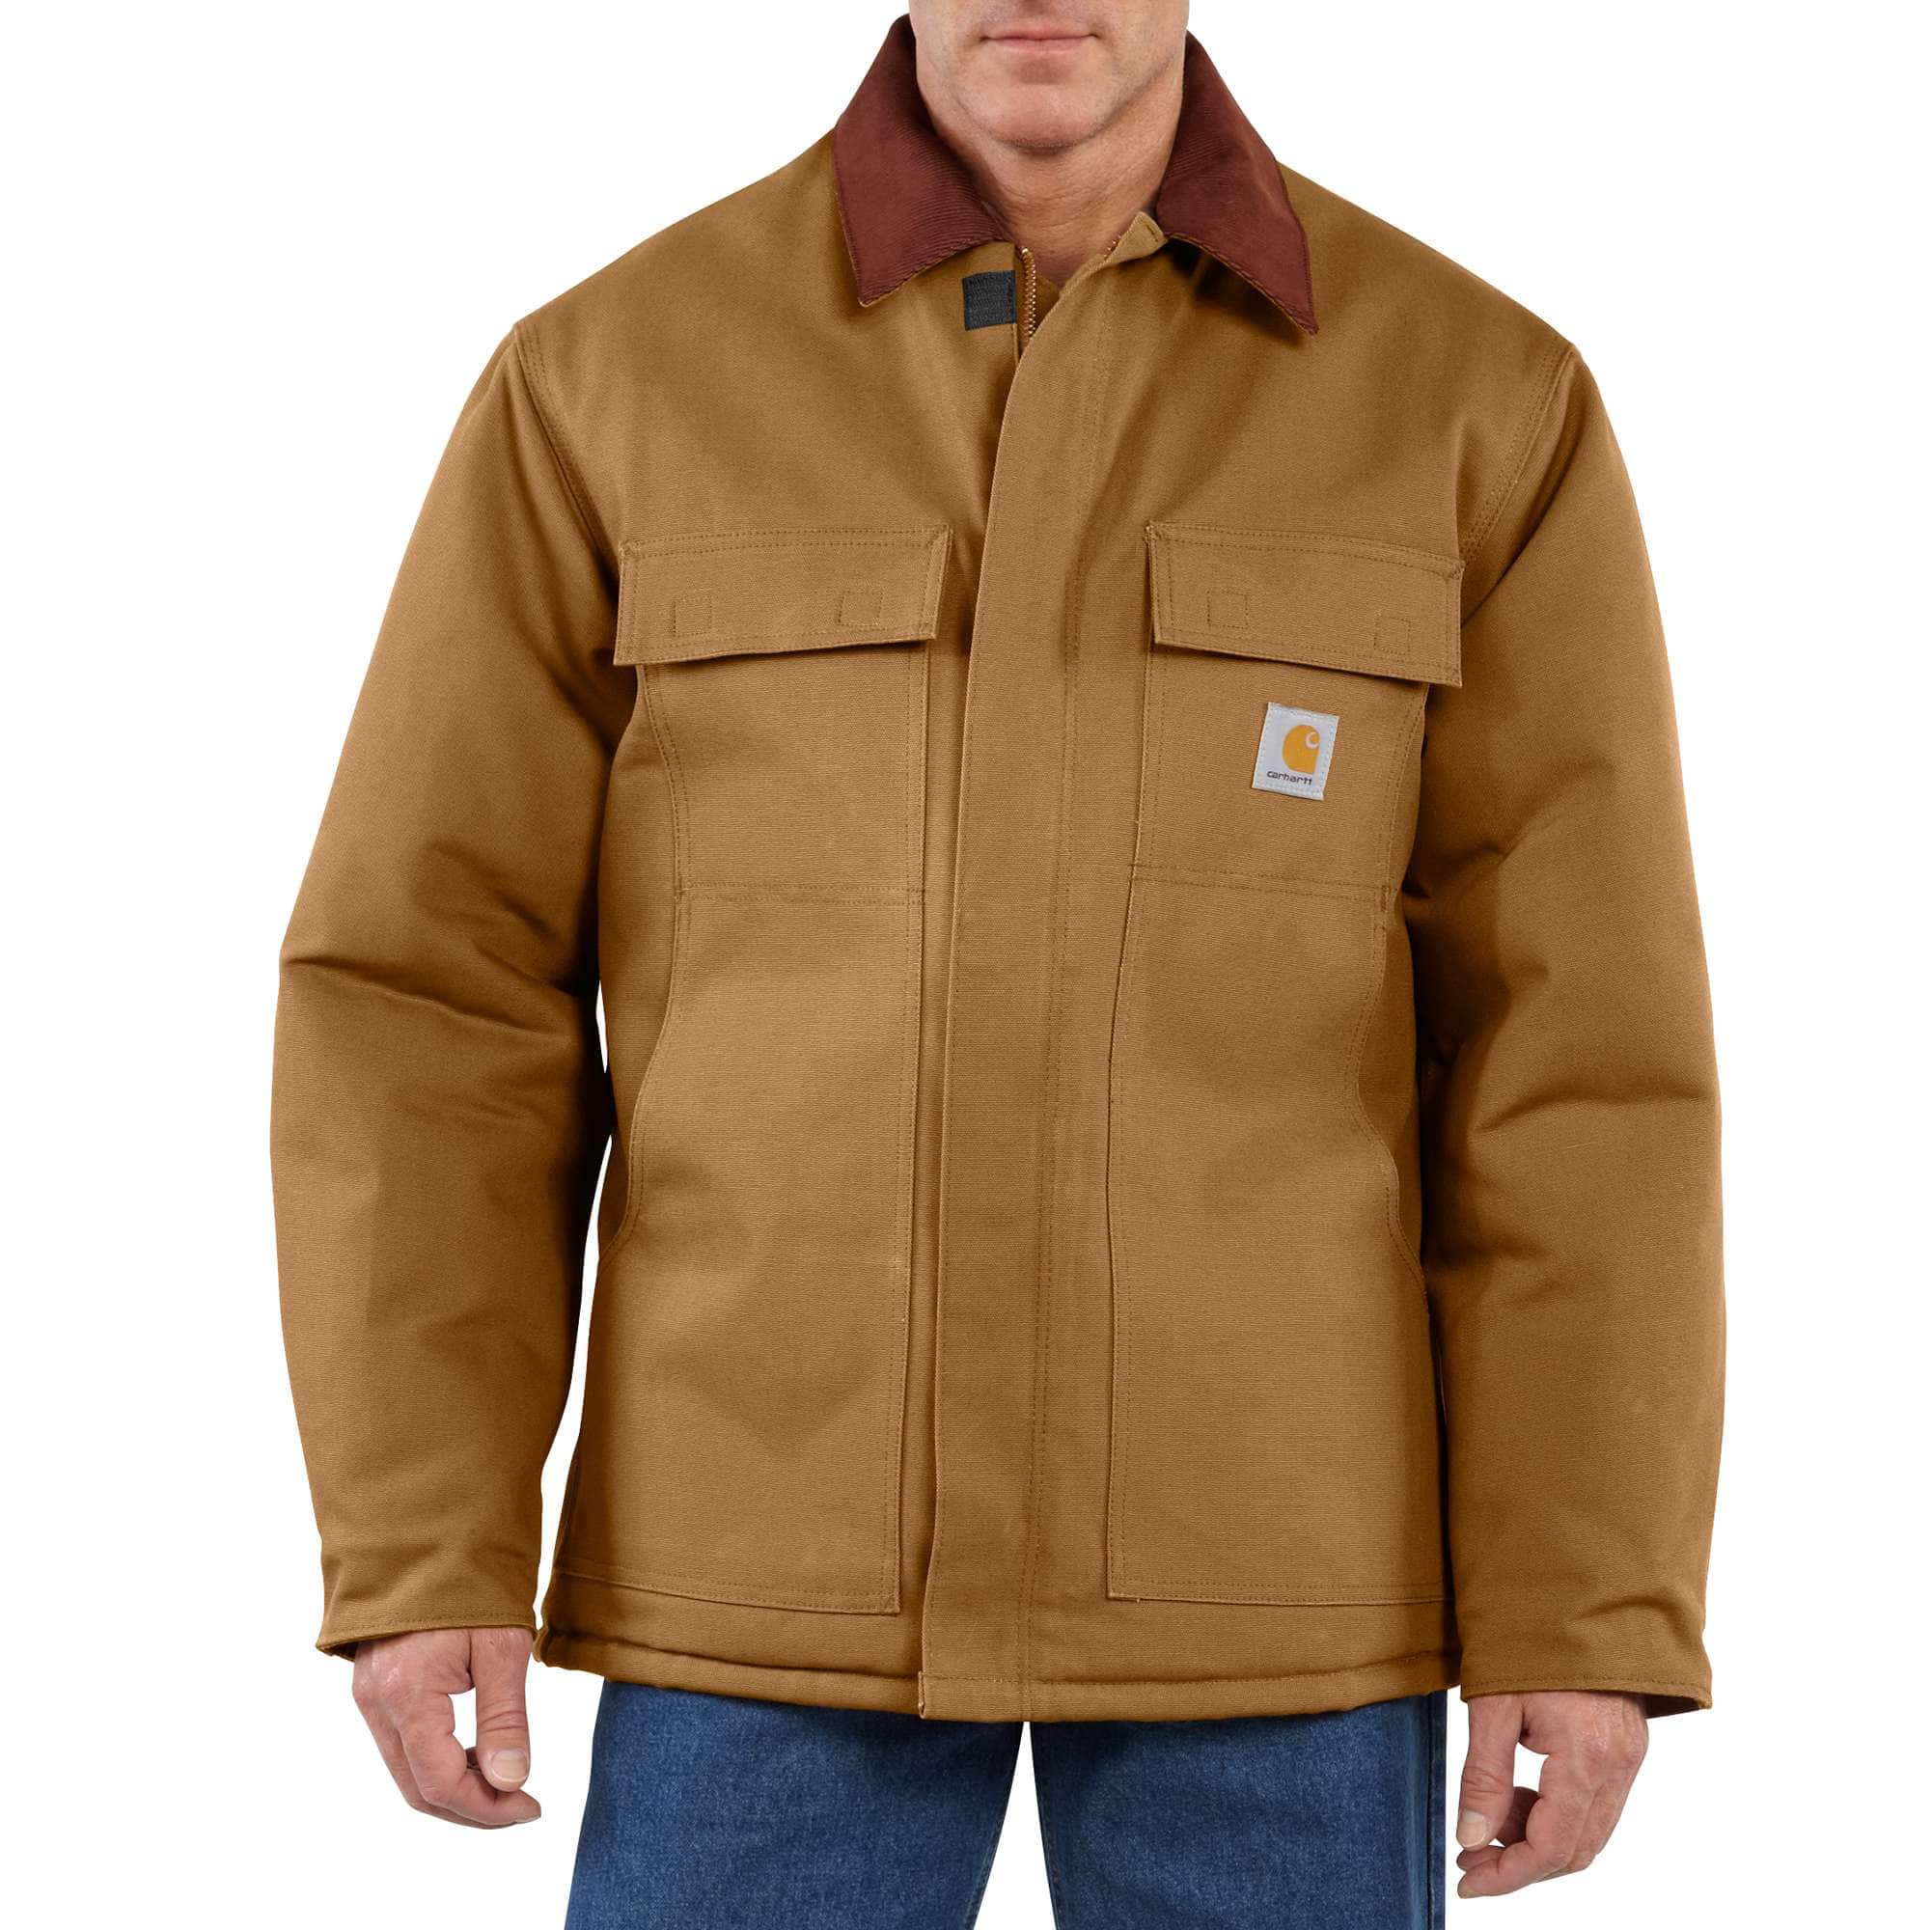 Men's Carhartt Duck Traditional Winter Jacket Arctic Weight Size Large Navy 